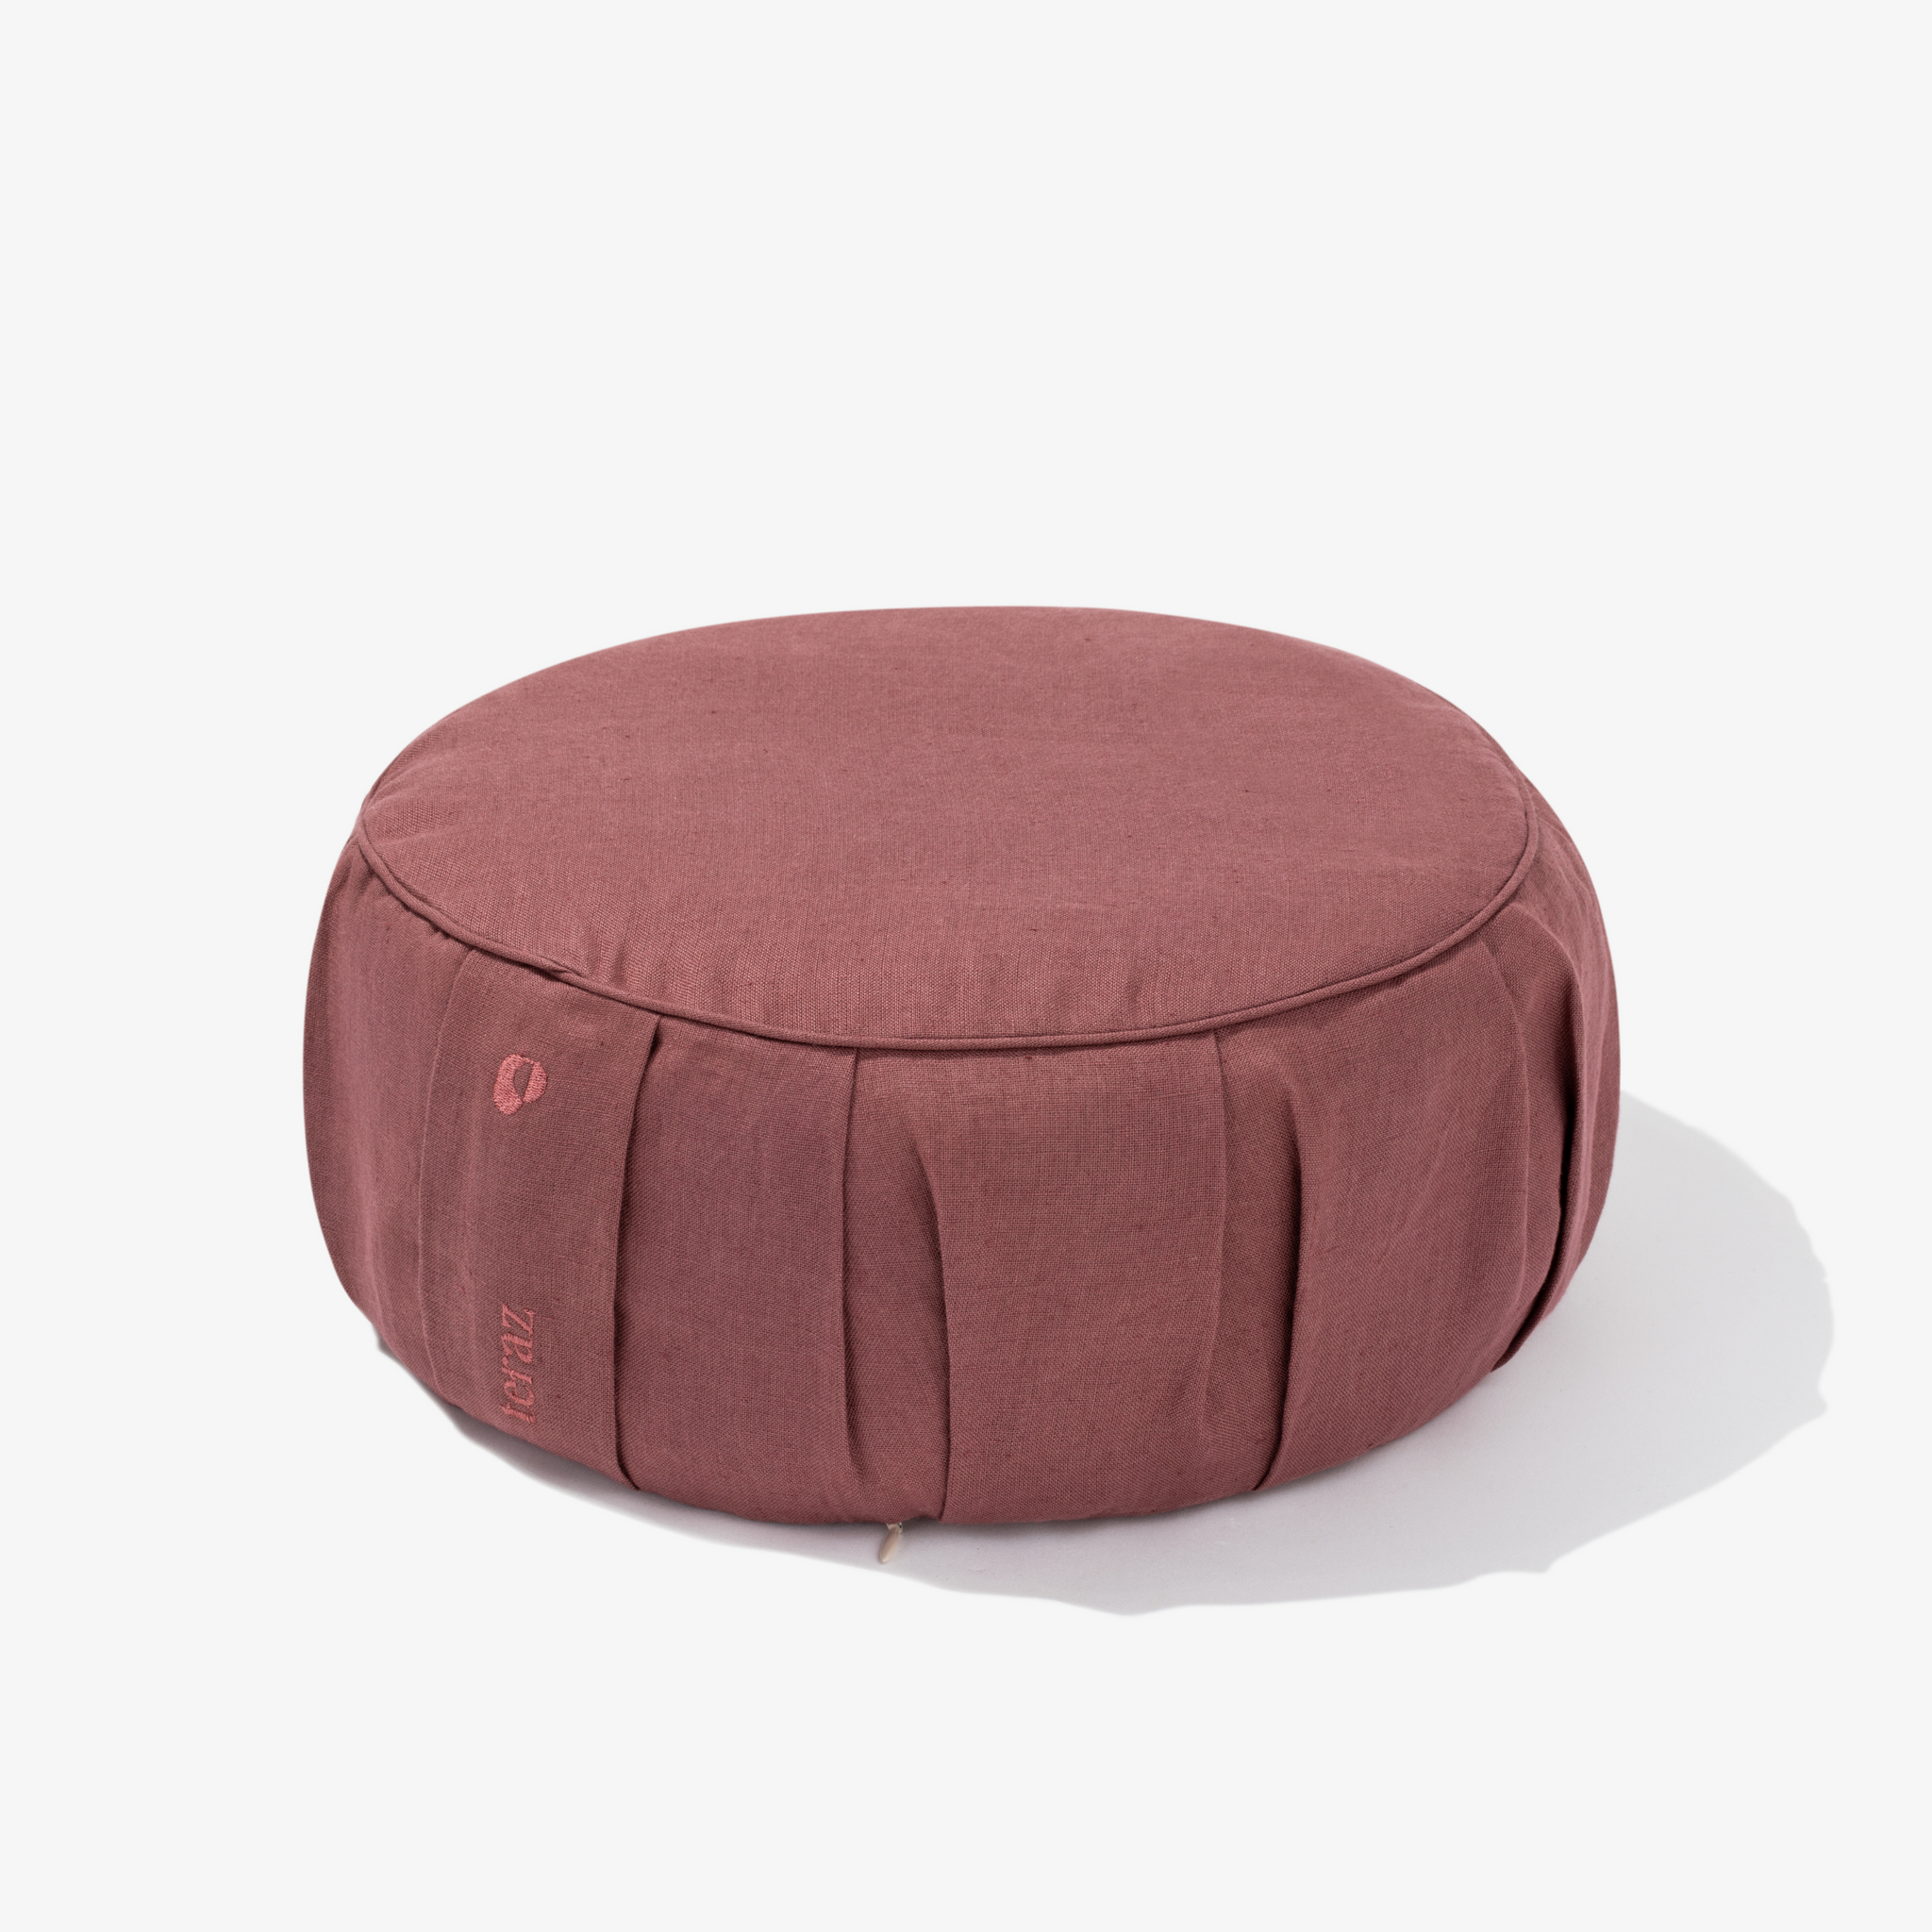 Linen meditation cushion "Protection and Strengthening"